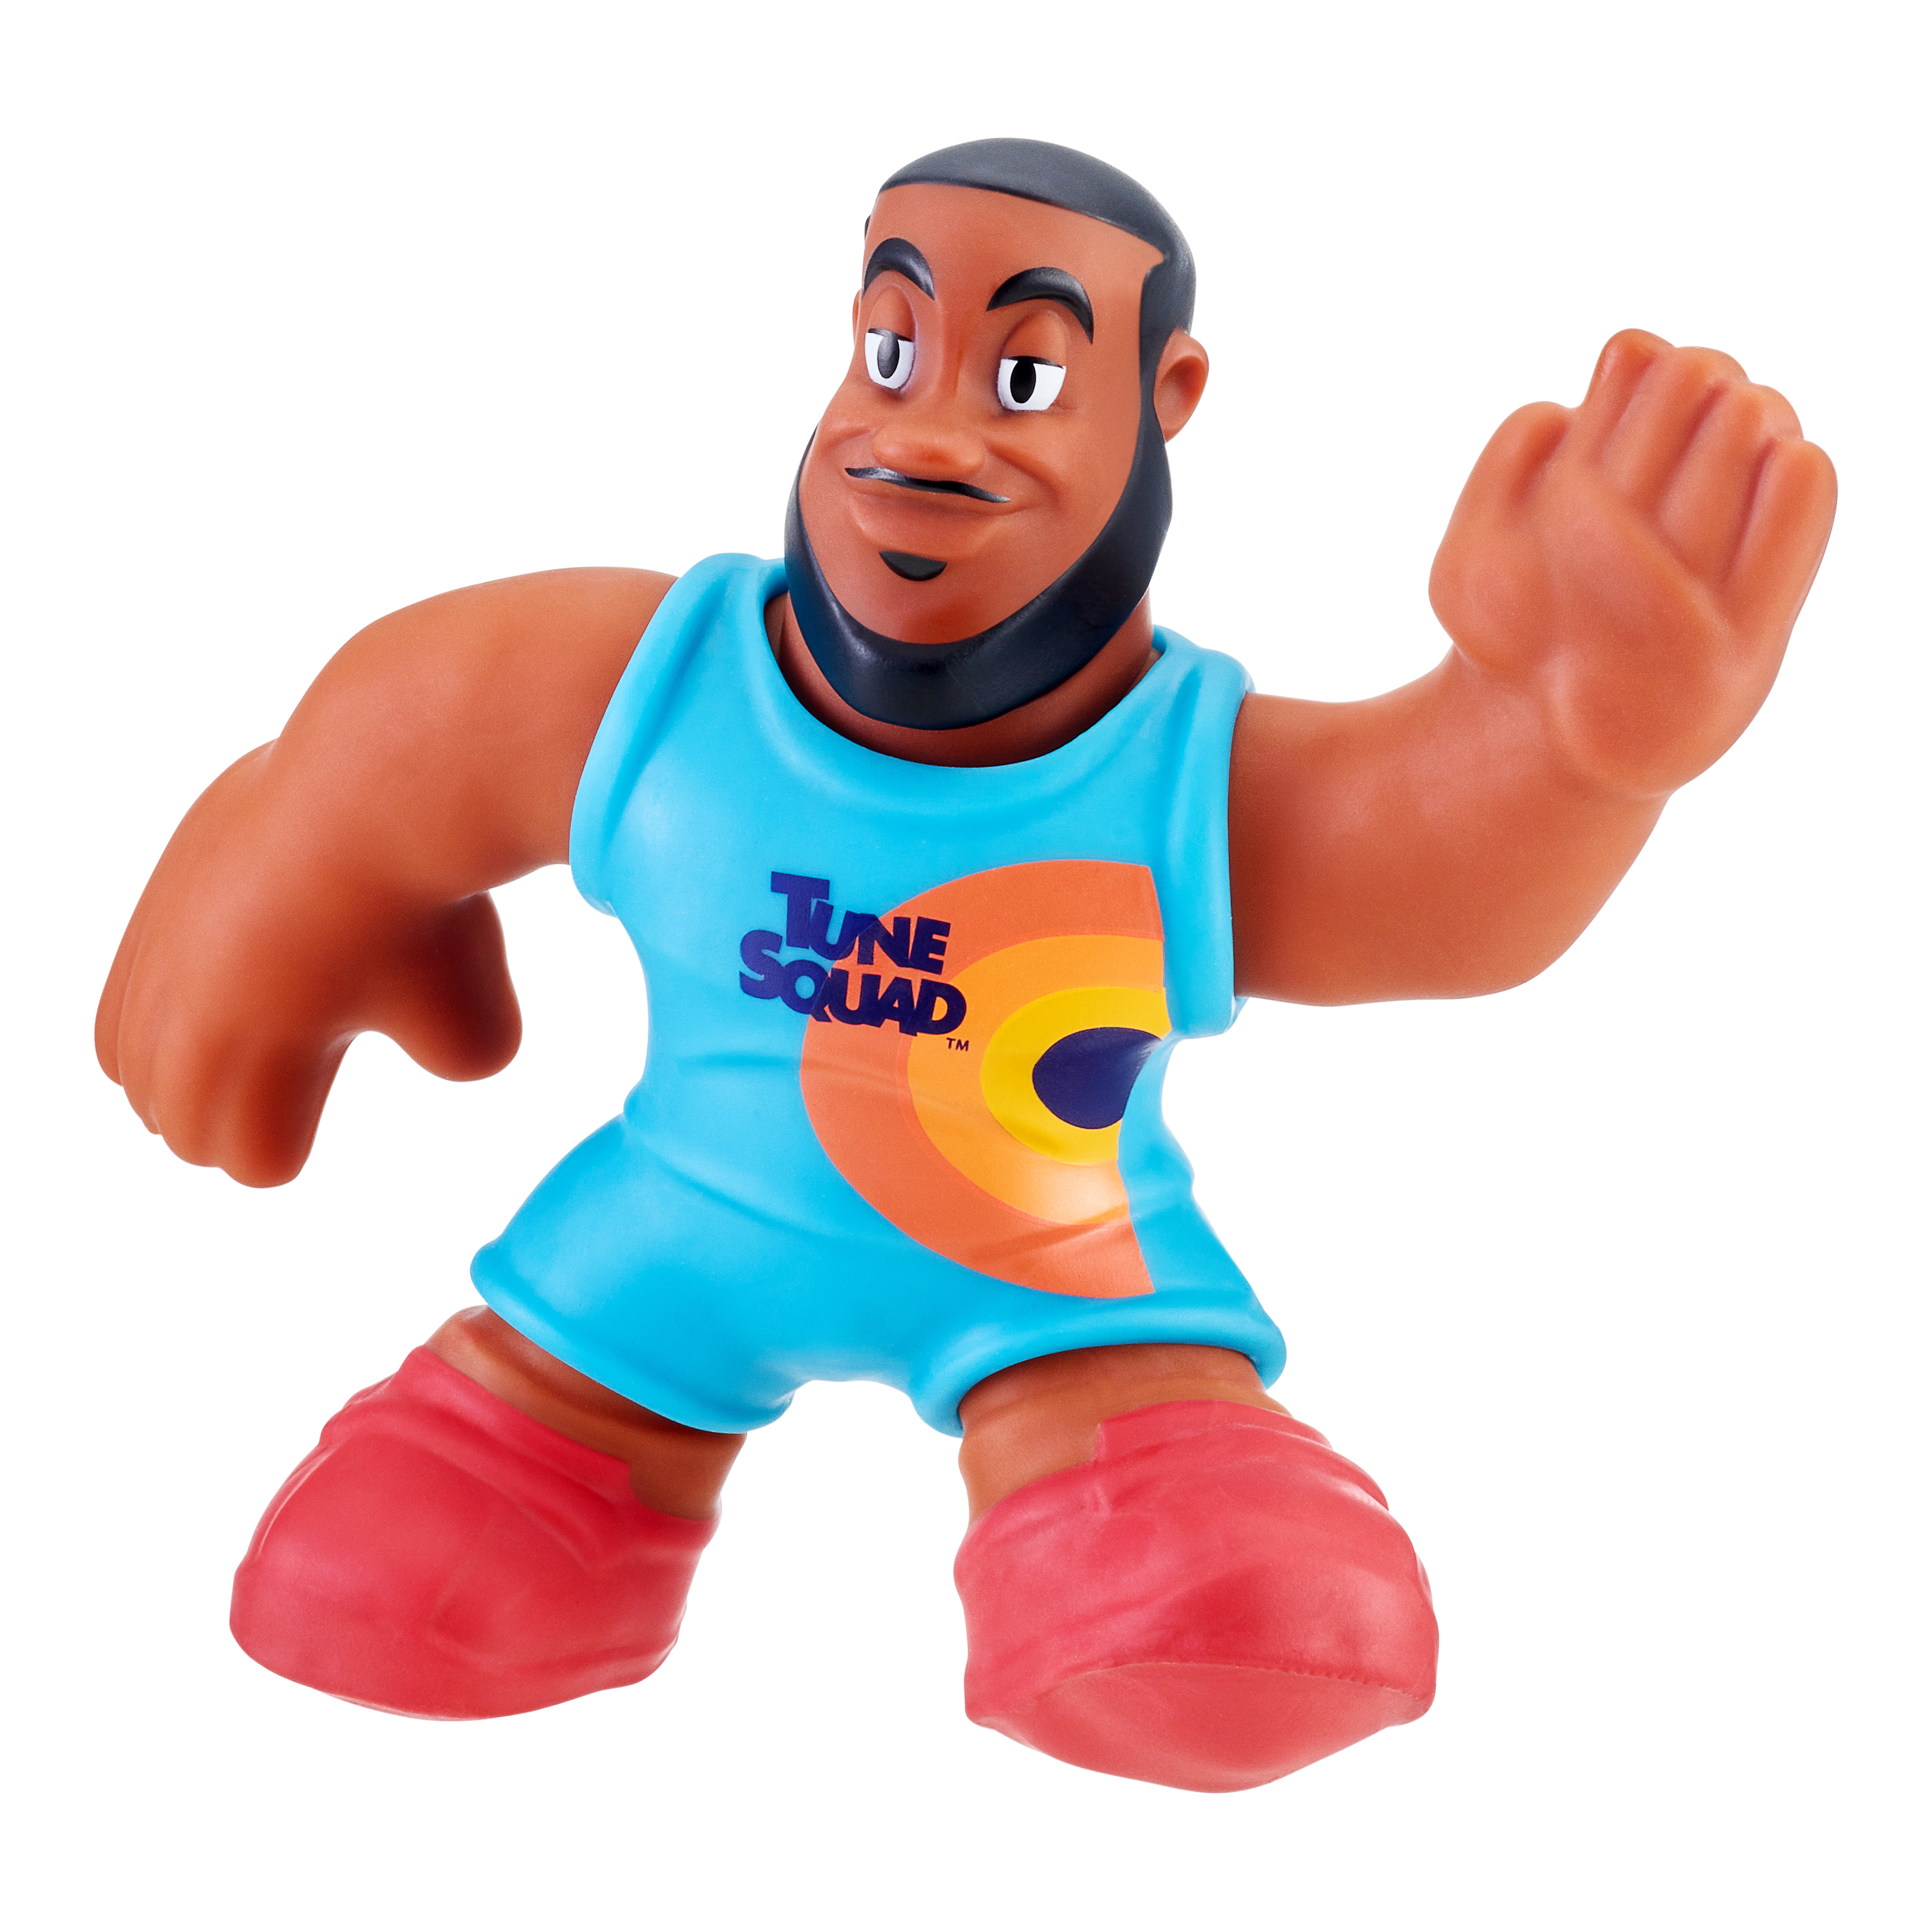 Moose Toys 14594 Space Jam: A New Legacy - 5" Stretchy Goo Filled Action Figure - Lebron James - image 5 of 10